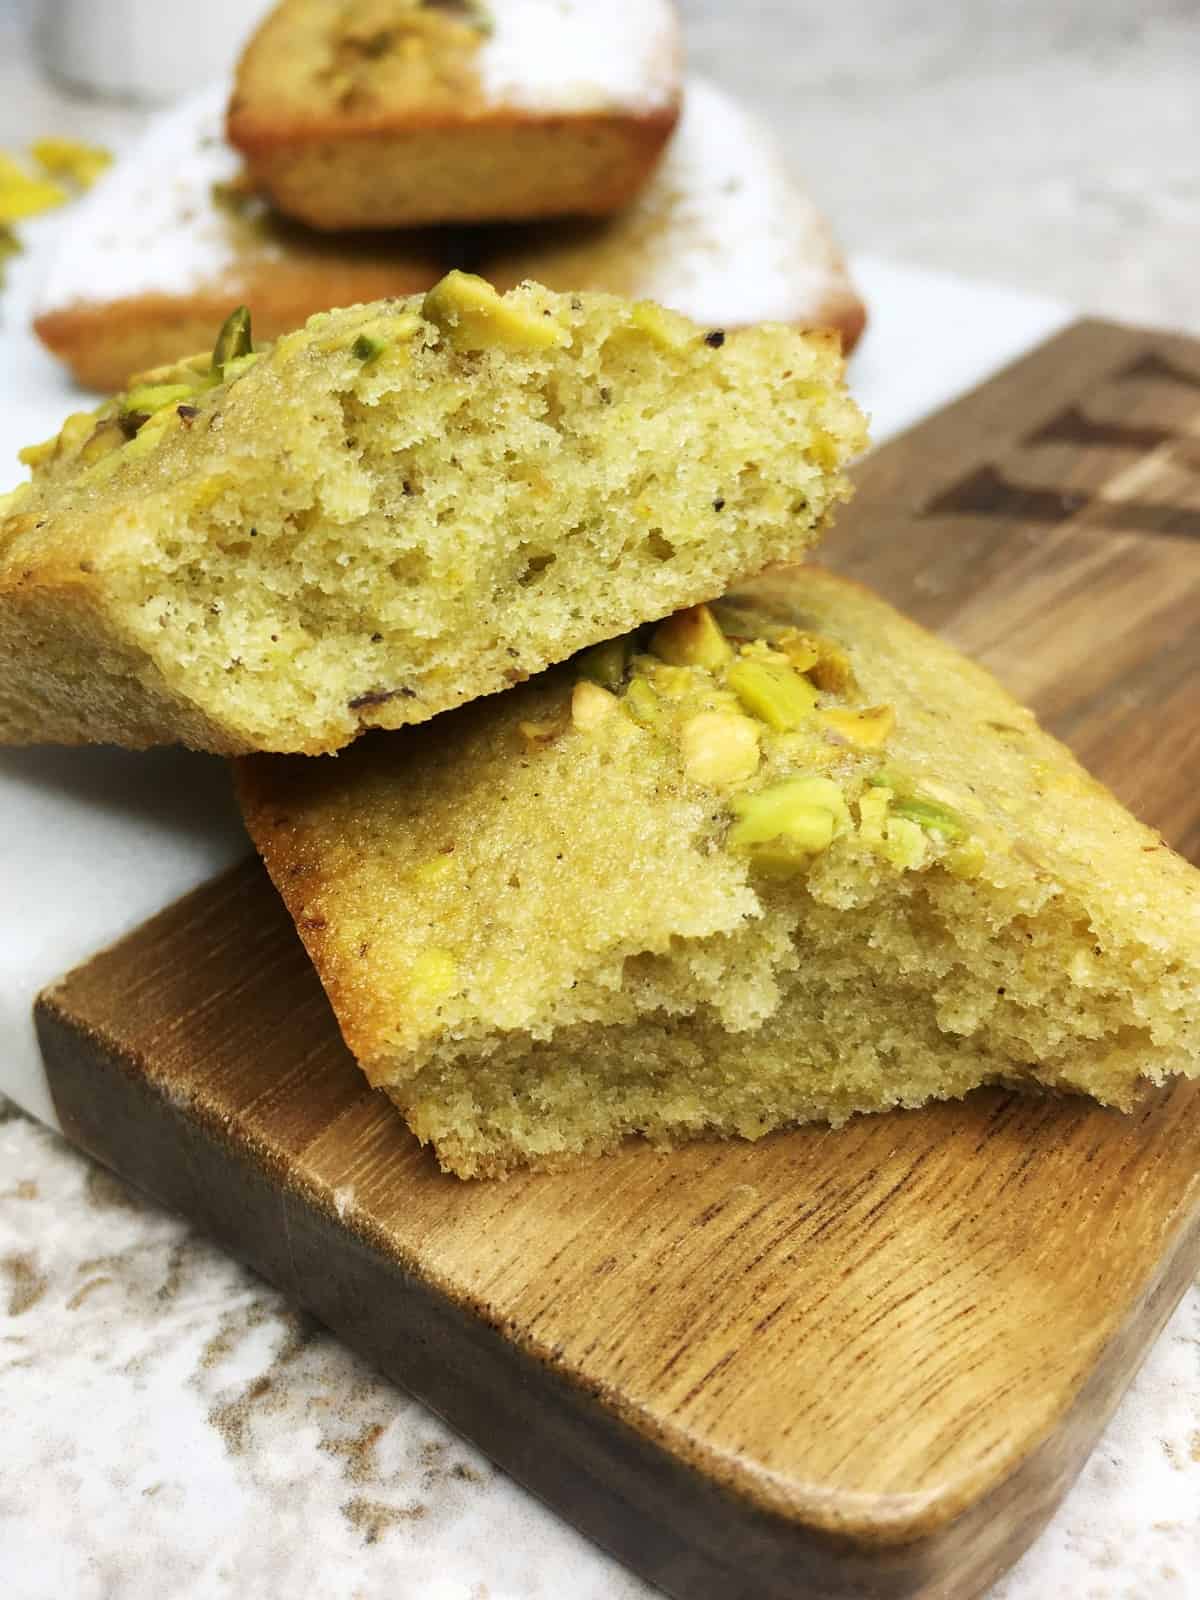 Sliced pistachio financier with three cakes and a cup on background